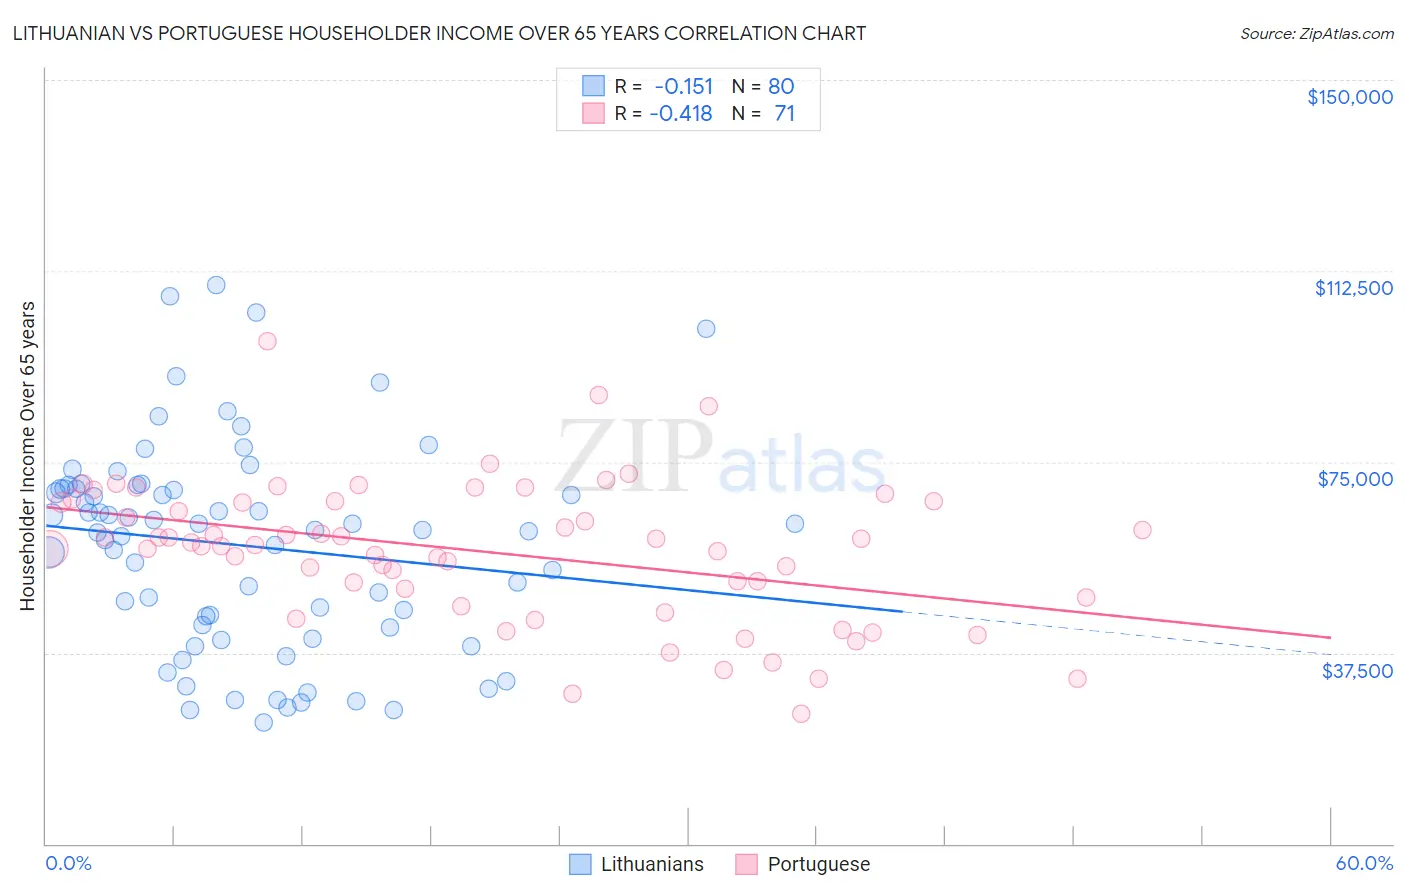 Lithuanian vs Portuguese Householder Income Over 65 years